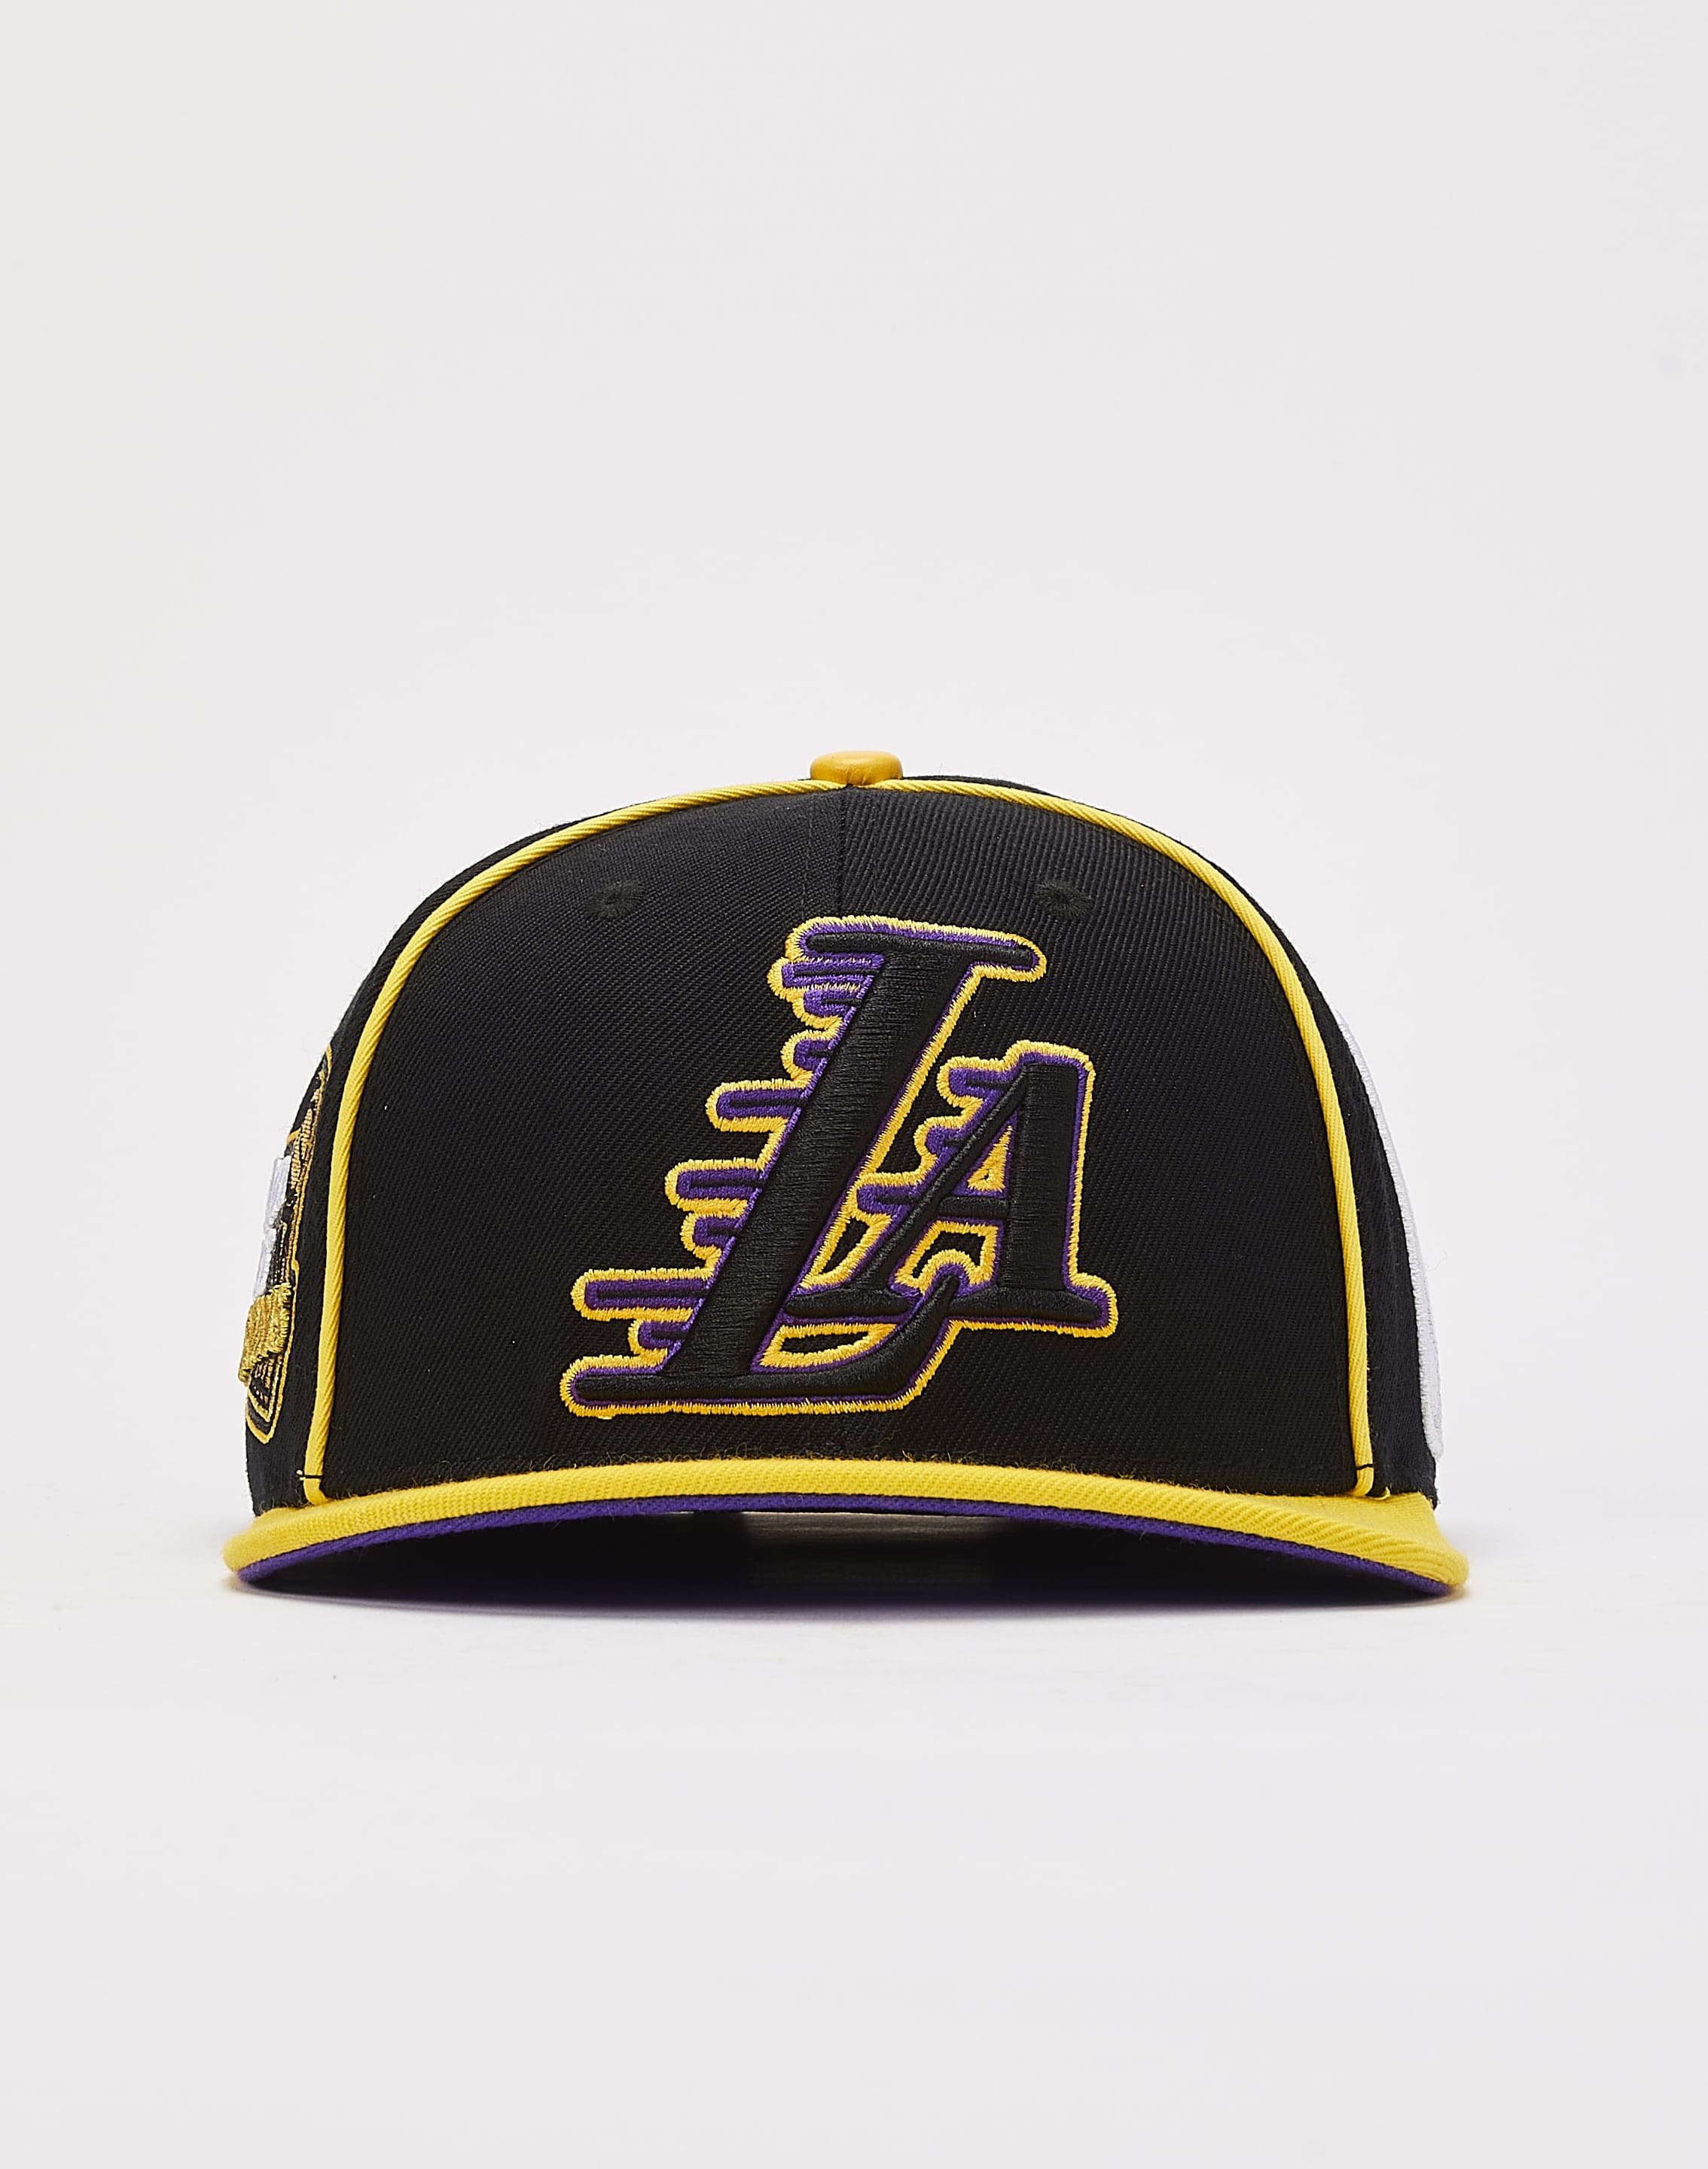 Pro Standard Los Angeles Lakers 17X Champs Snapback Hat – DTLR